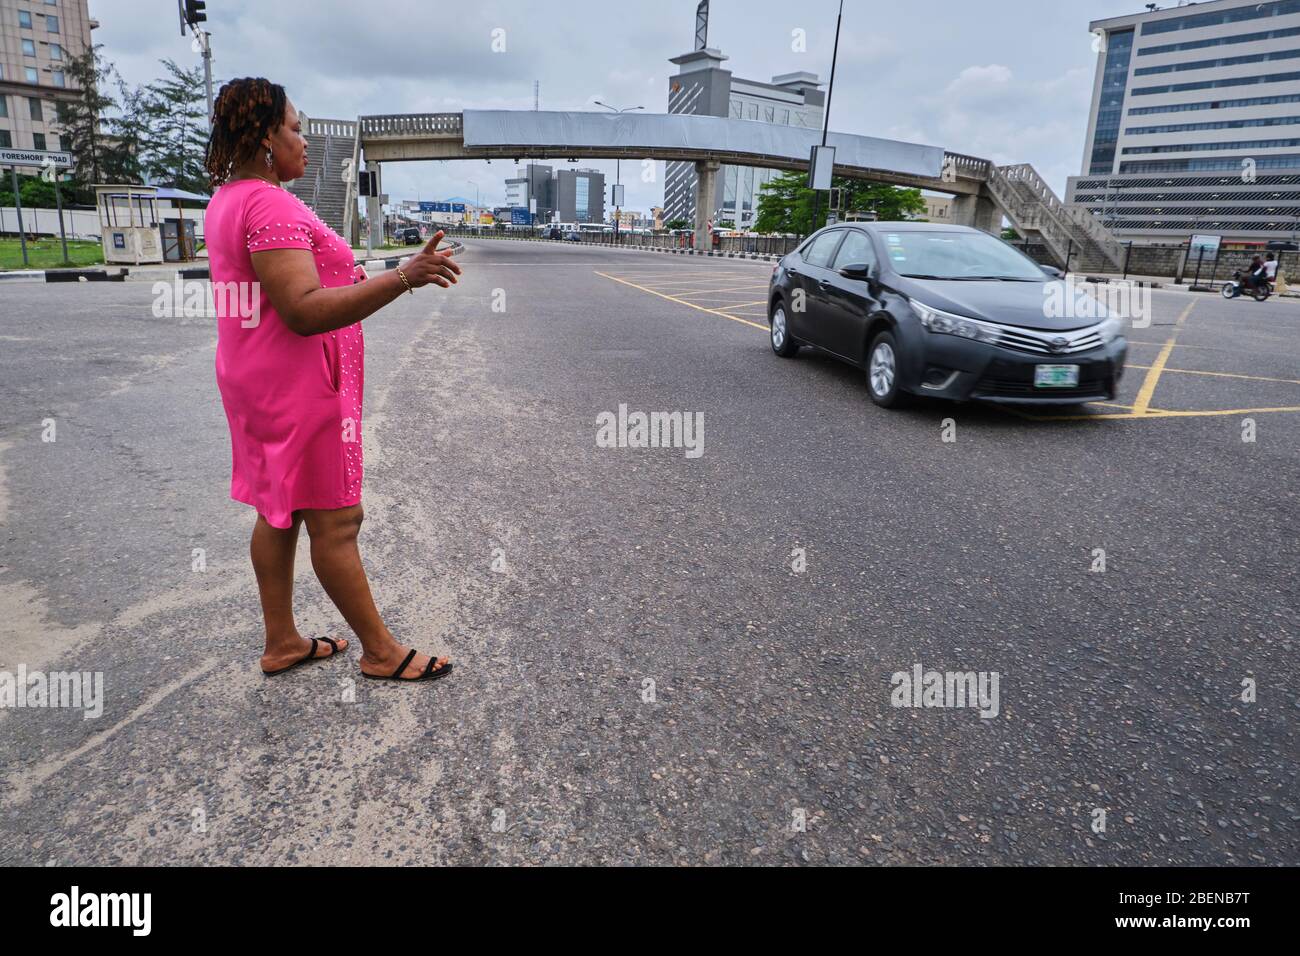 A woman tries to flag down a car during the Covid-19 lockdown in Lagos, Nigeria. Stock Photo